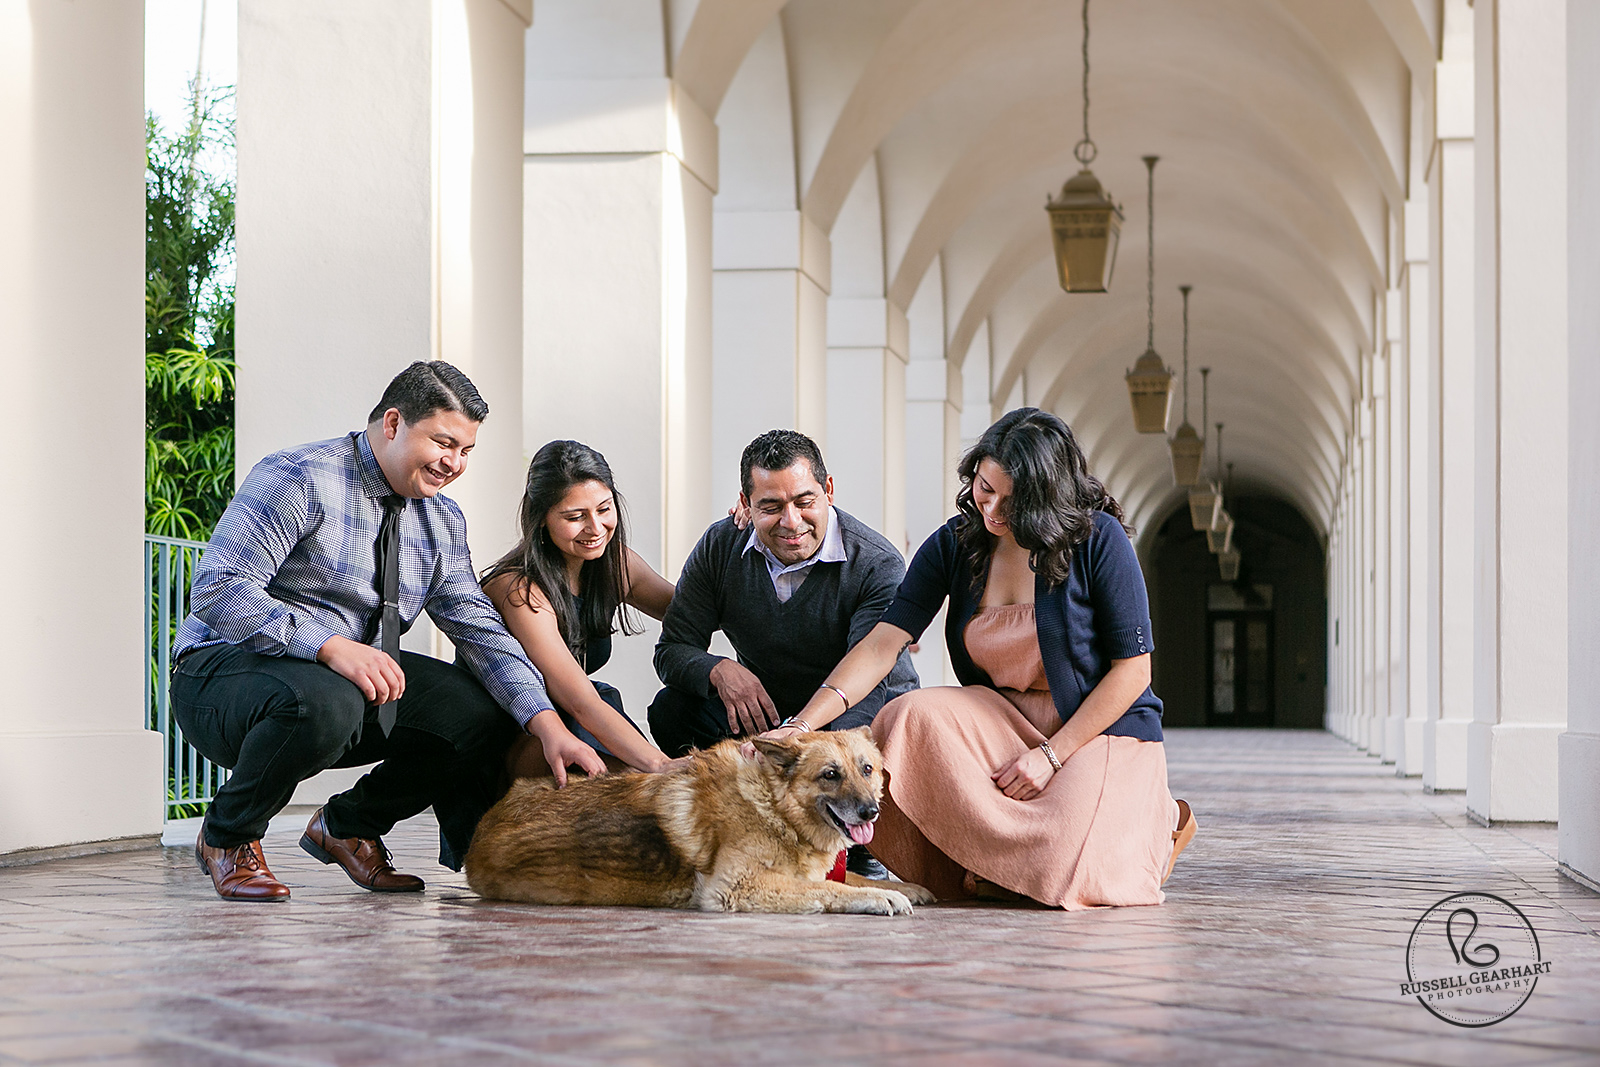 Family petting dog - Pasadena City Hall Family Portraits – Russell Gearhart Photography – www.gearhartphoto.com